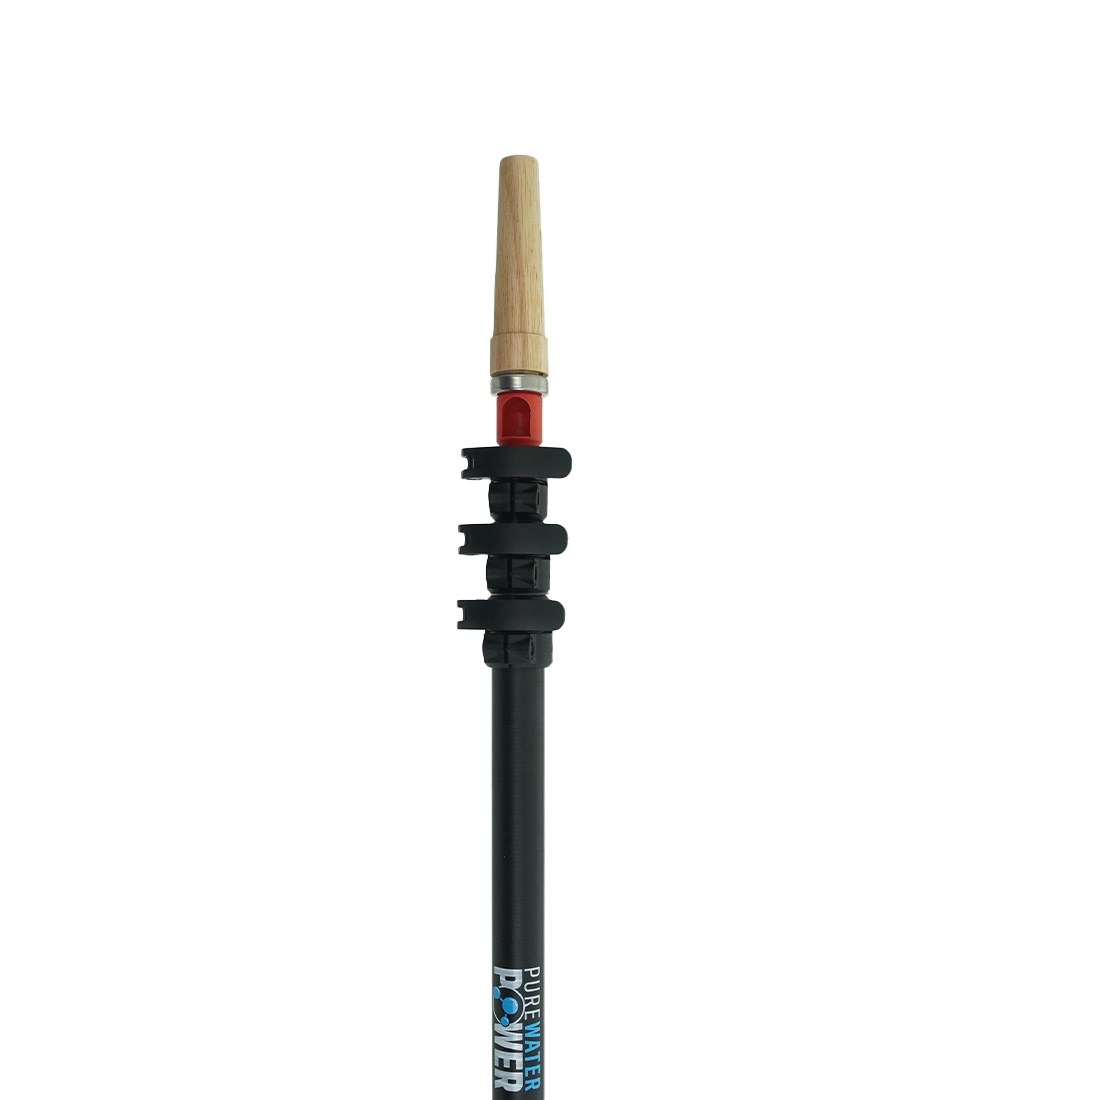 PWP Trad Pole - 10 Foot Tip View